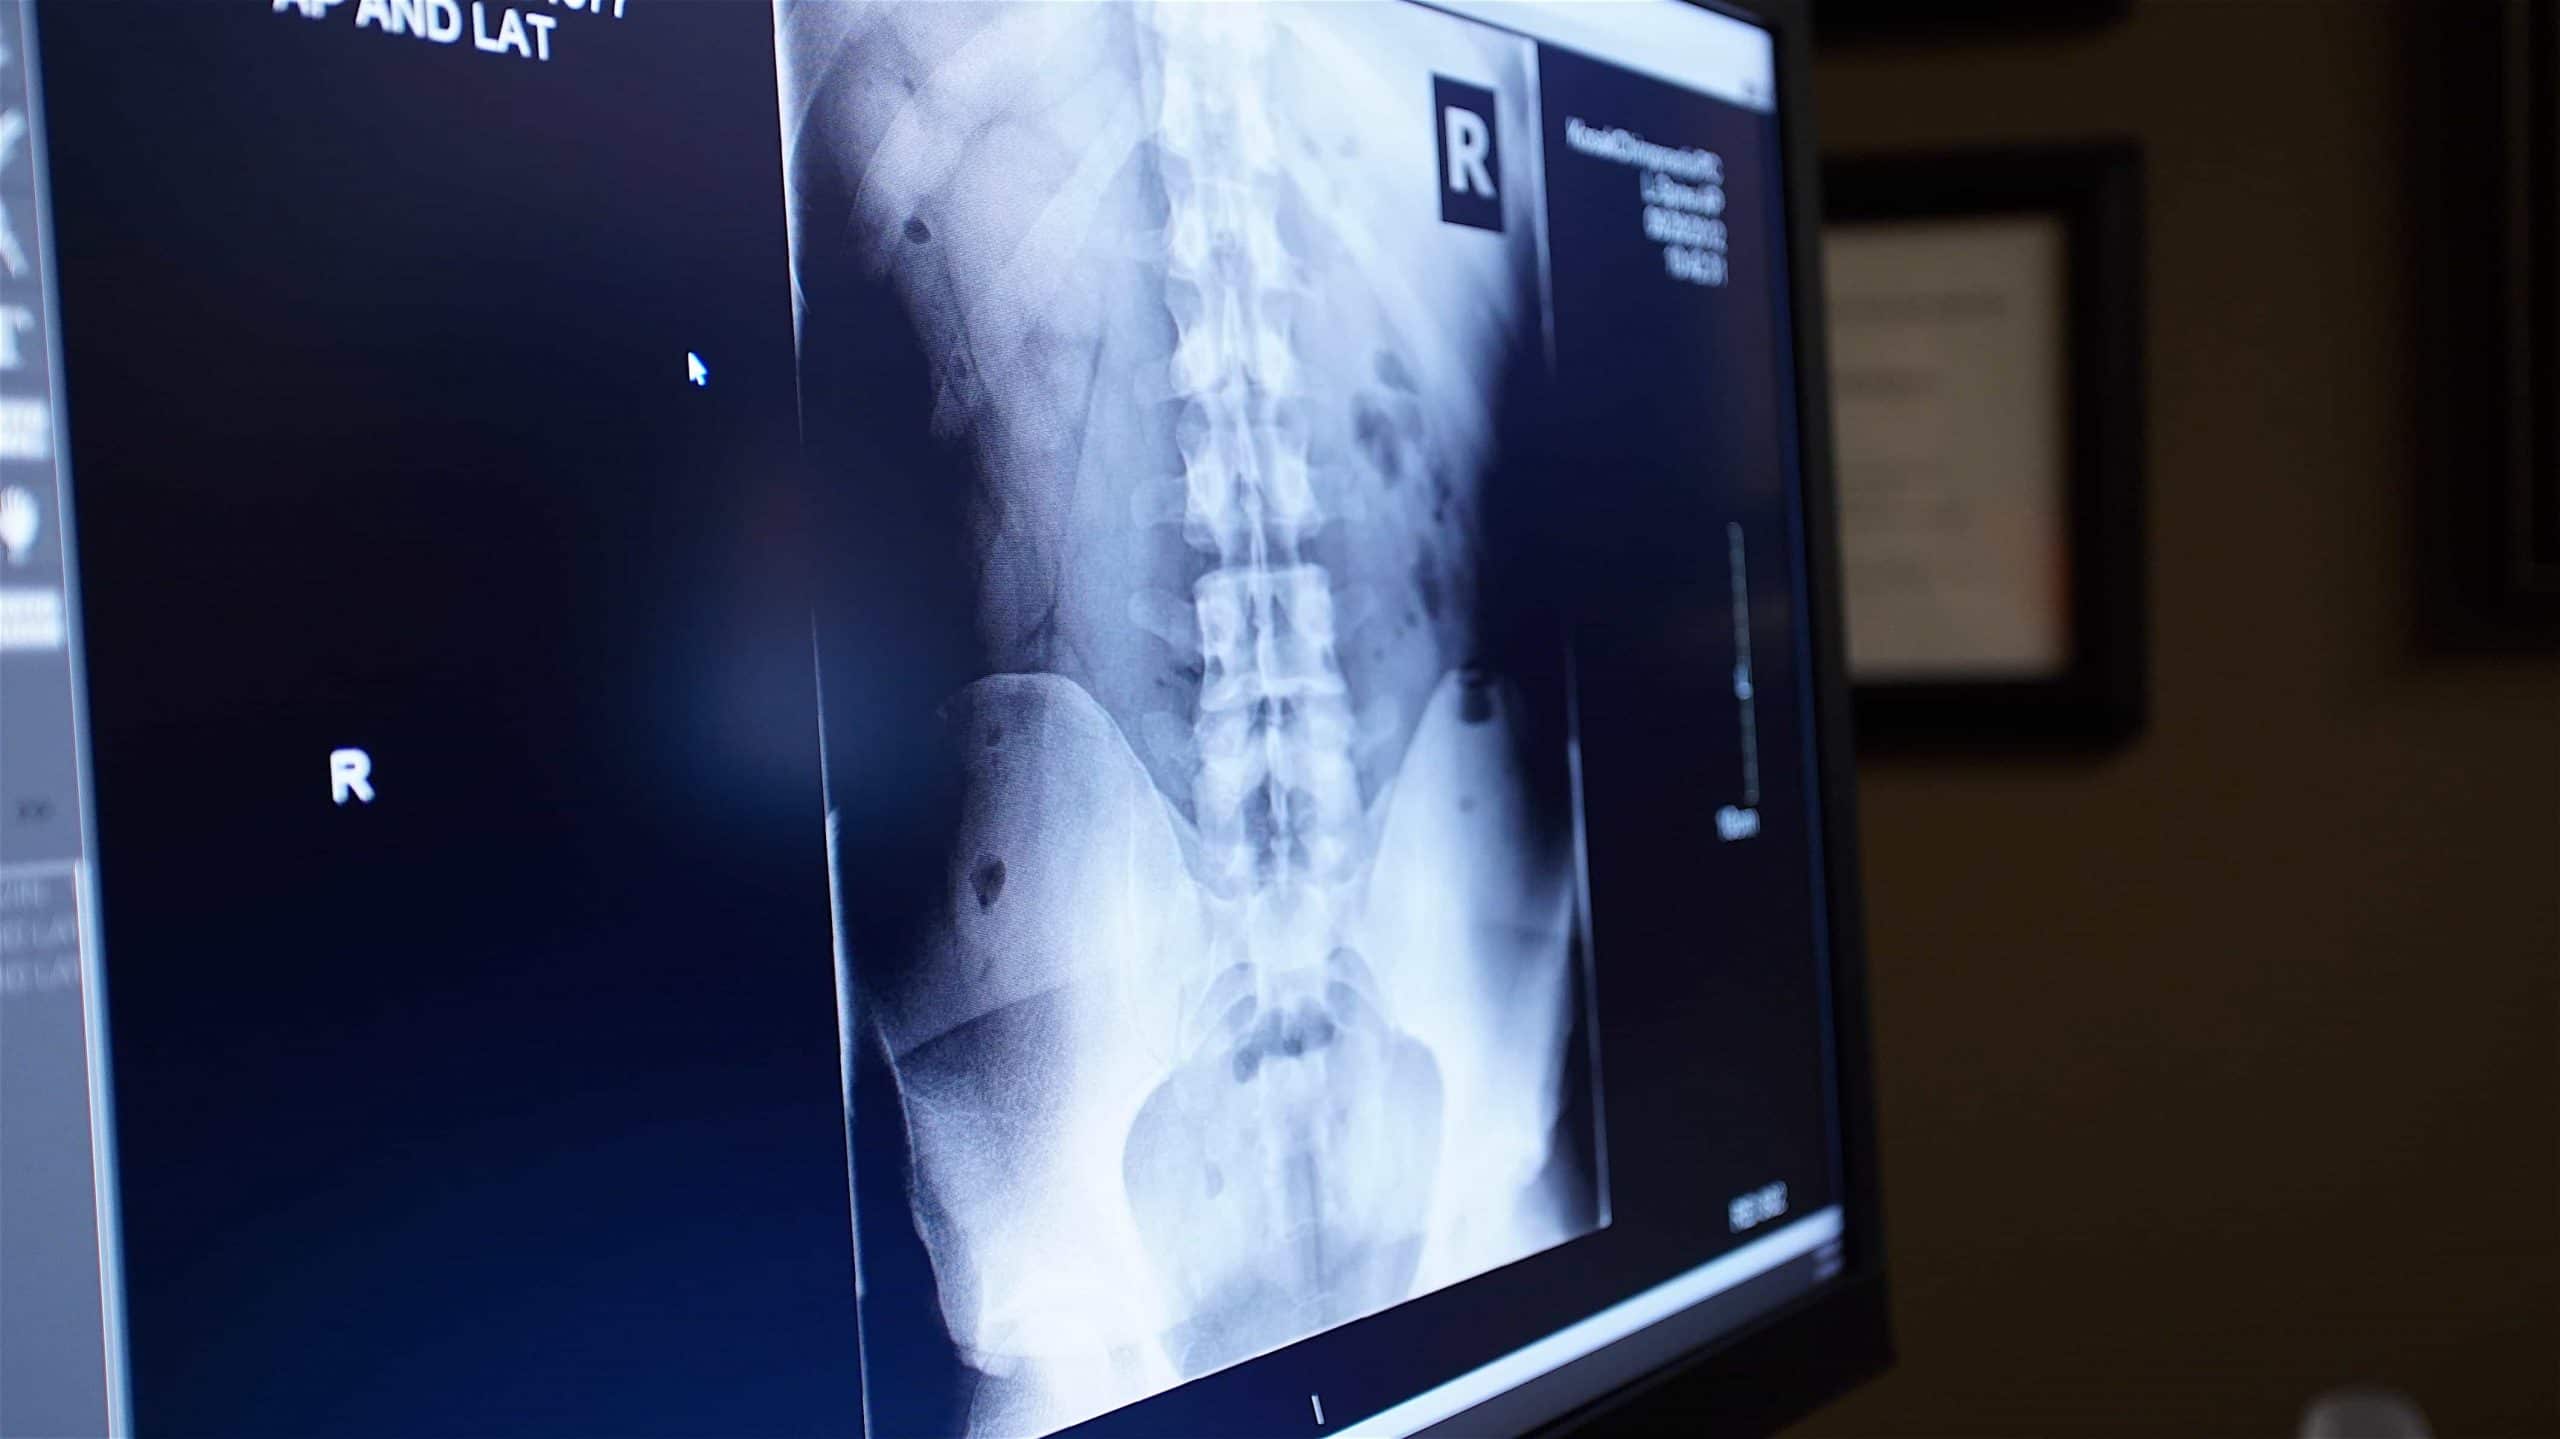 Images and xrays are shown to patients who just had a personal injury experience